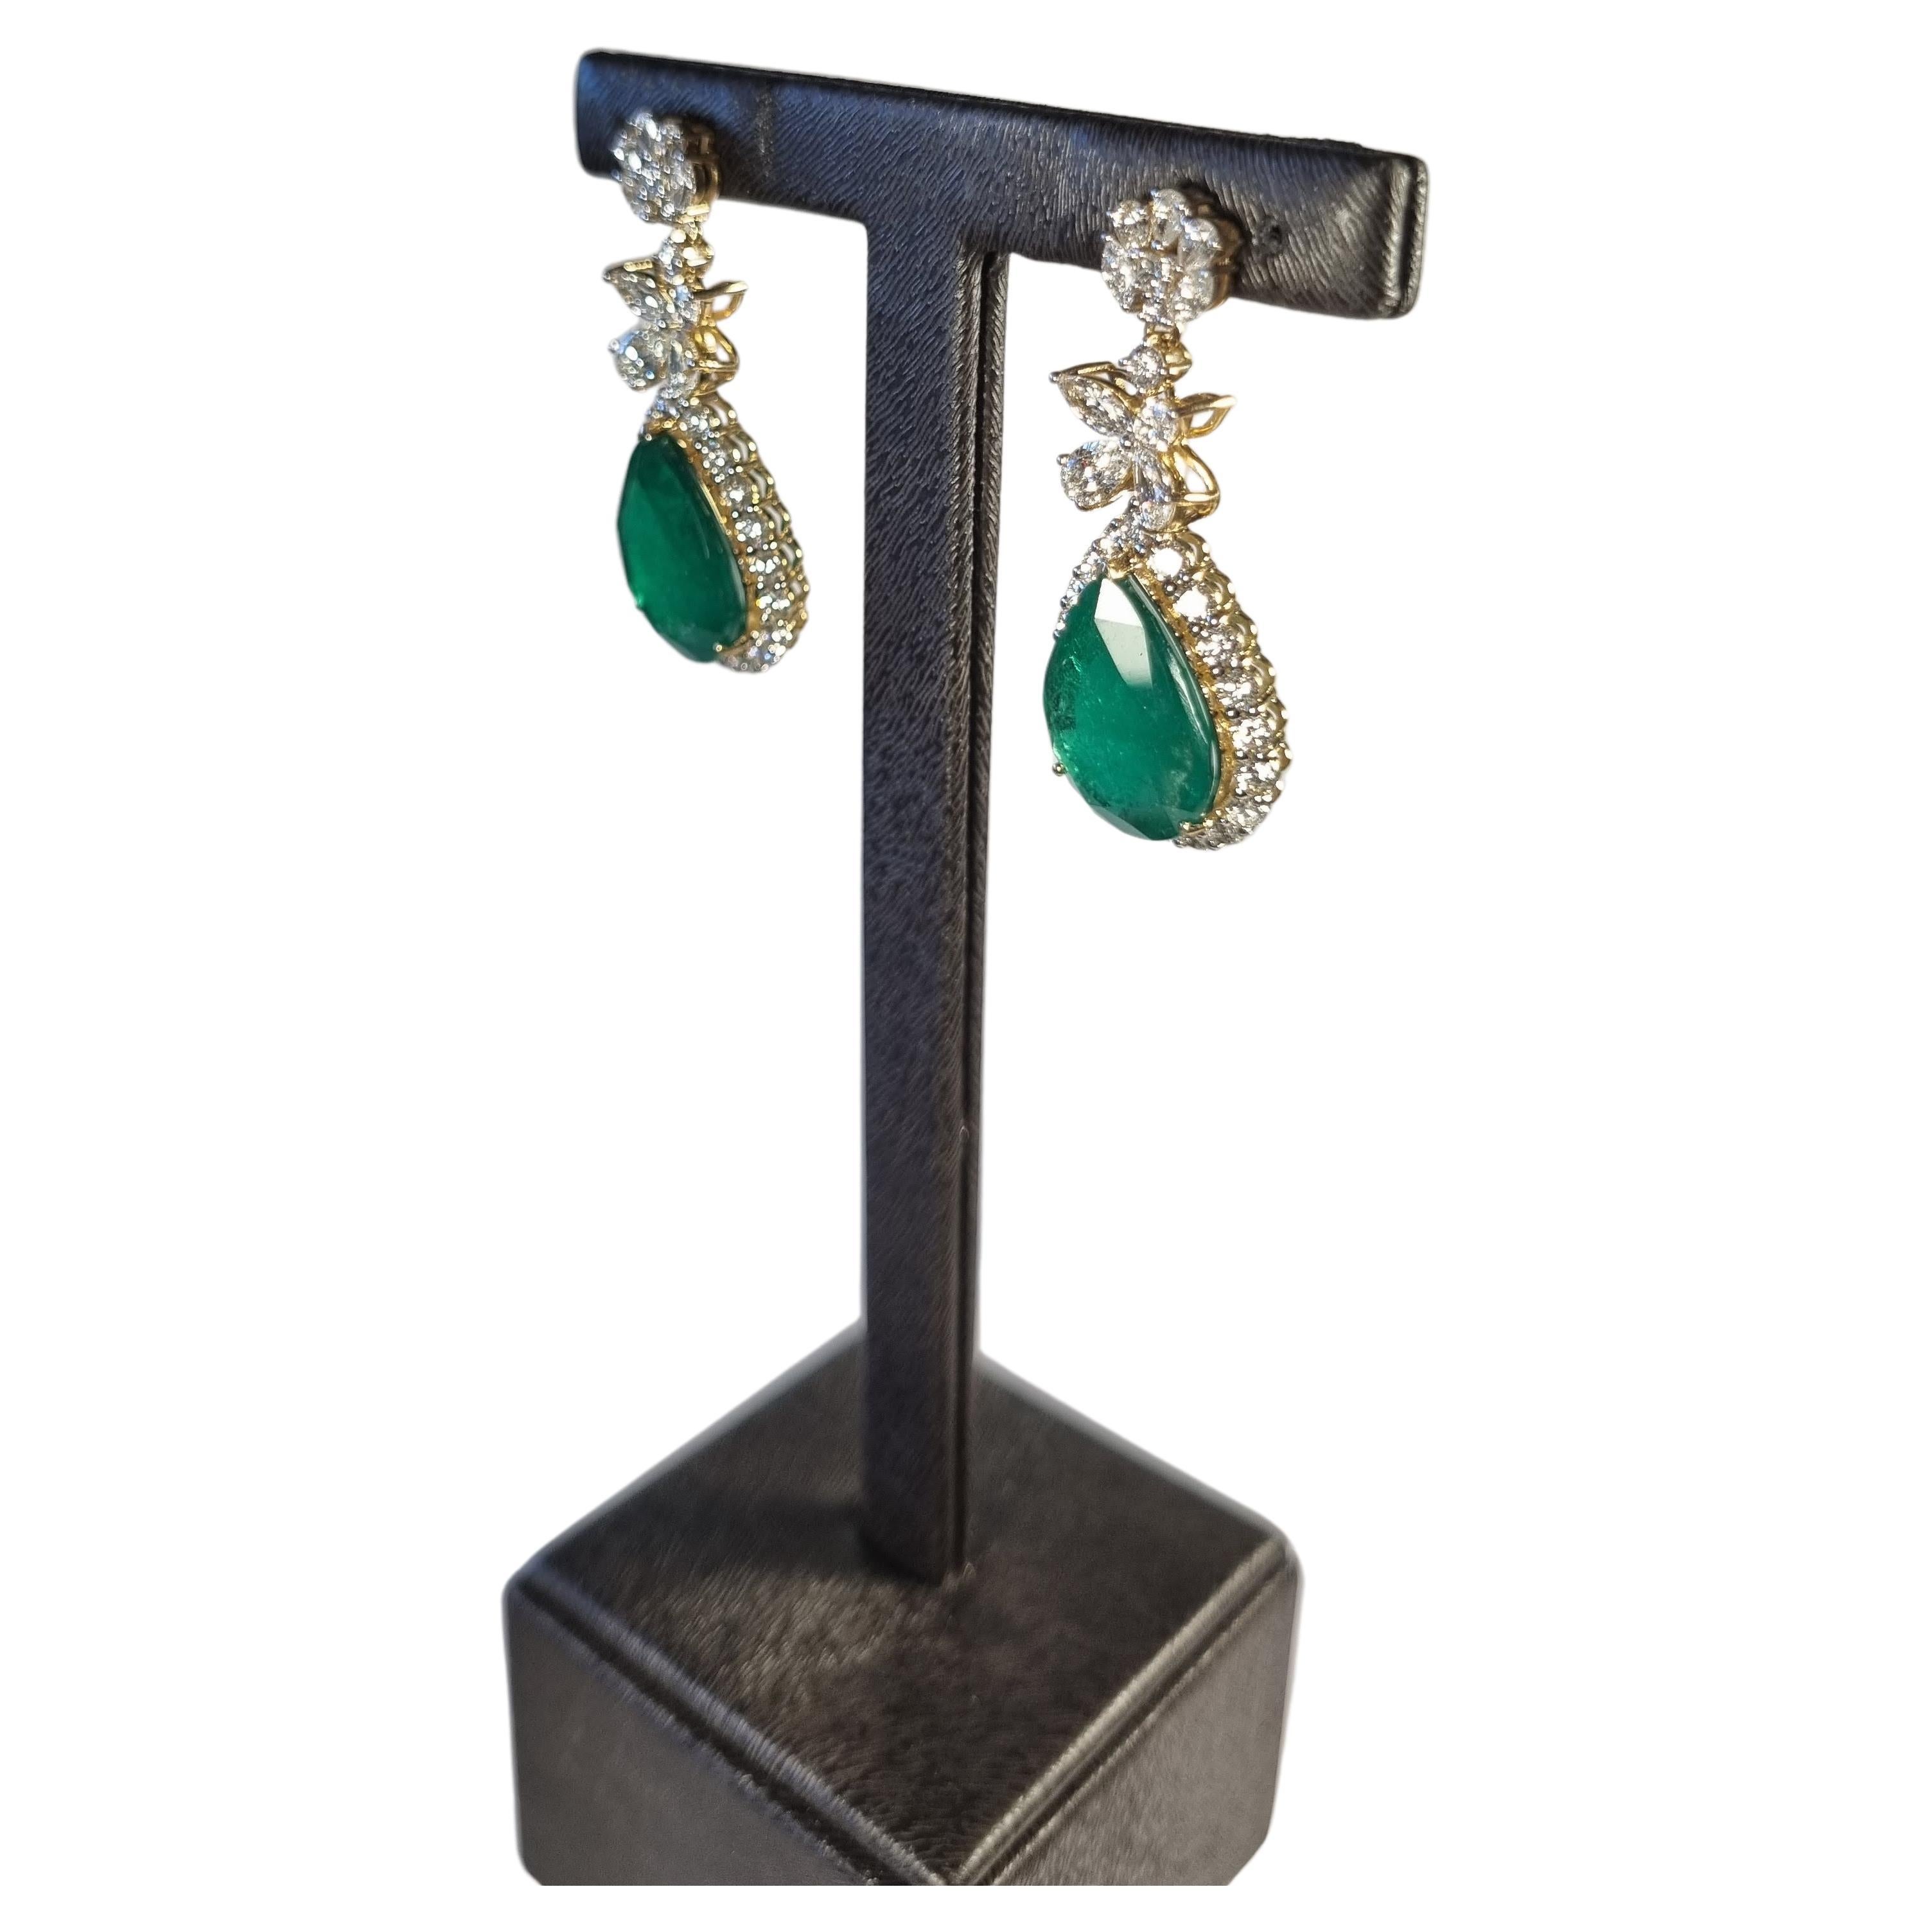 Colombian Emerald Earrings with Diamonds and Yellow Gold
Yellow Gold 10gr
Emerald 12.50ct.
Diamonds 180 total 2.4ct.
Total Weight 12.36gr

Irama Pradera is a Young designer from Spain that searches always for the best gems and combines classic with